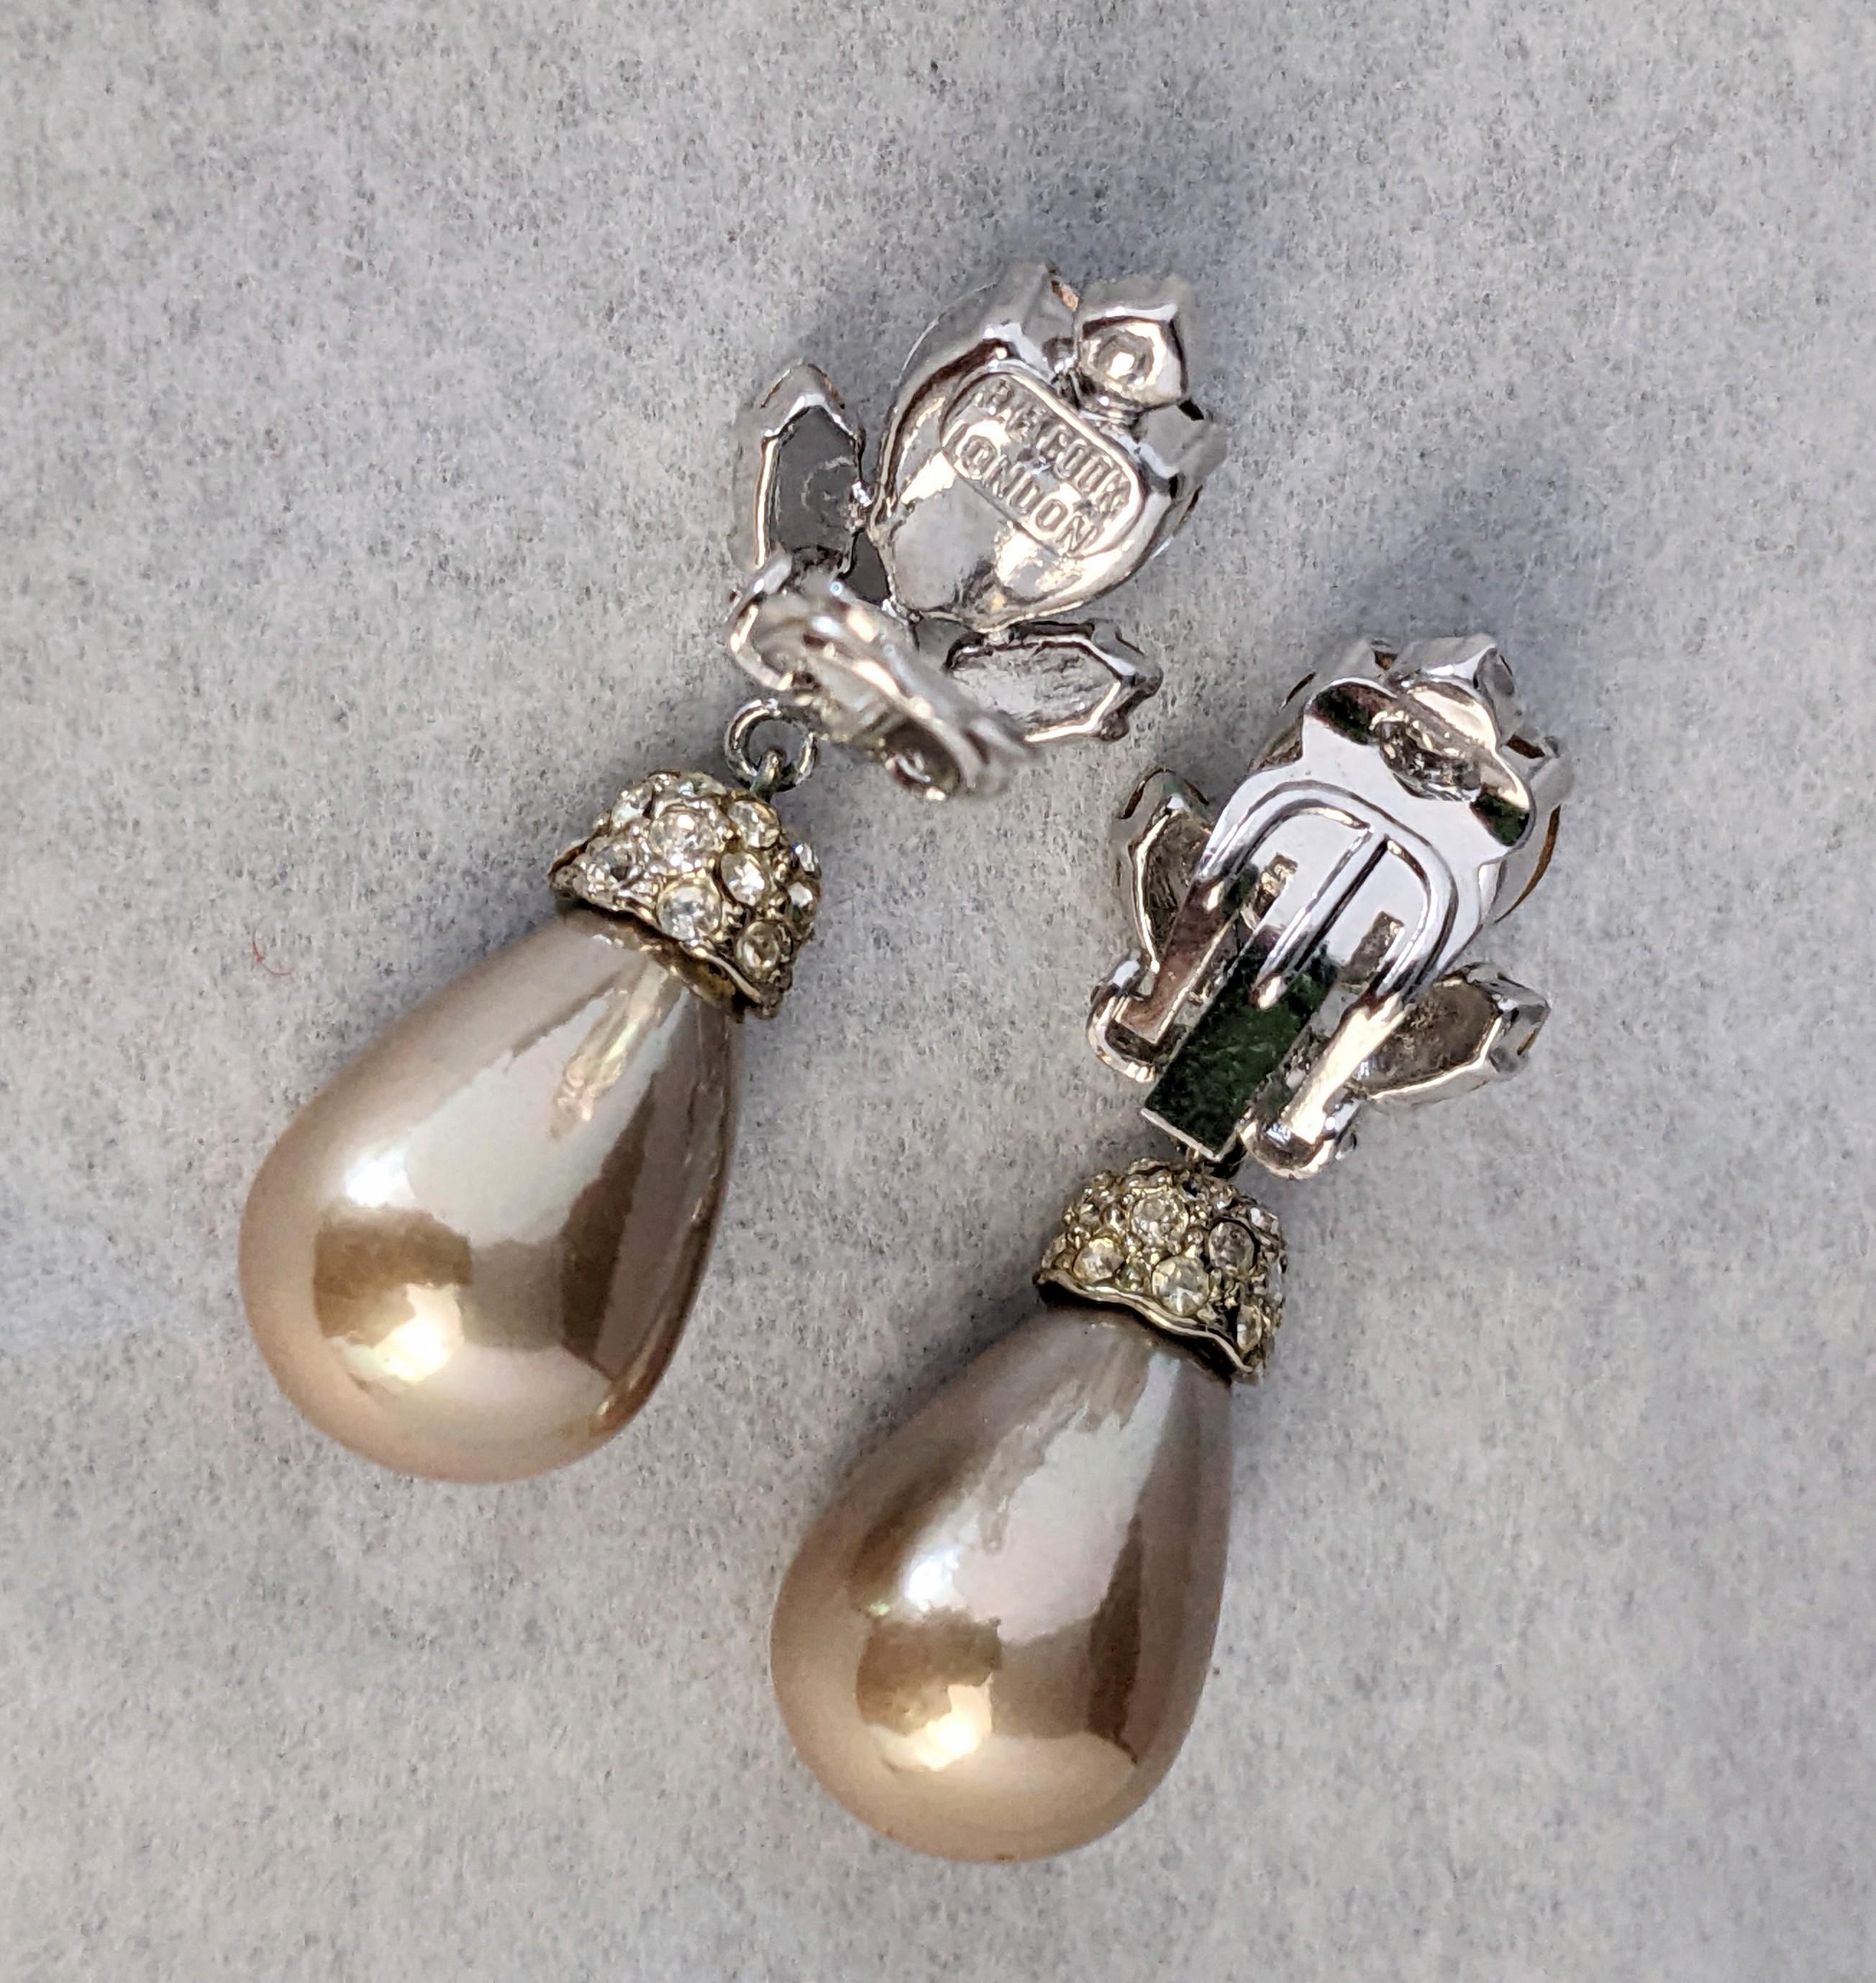 Charming Heart Shaped Crystal Earrings, B. Cook, London from the 1990's. Unusual, high quality crystal earrings in the Dior style with faux champagne pearl drops with pave caps. Clip back fittings. Excellent condition. 1.75